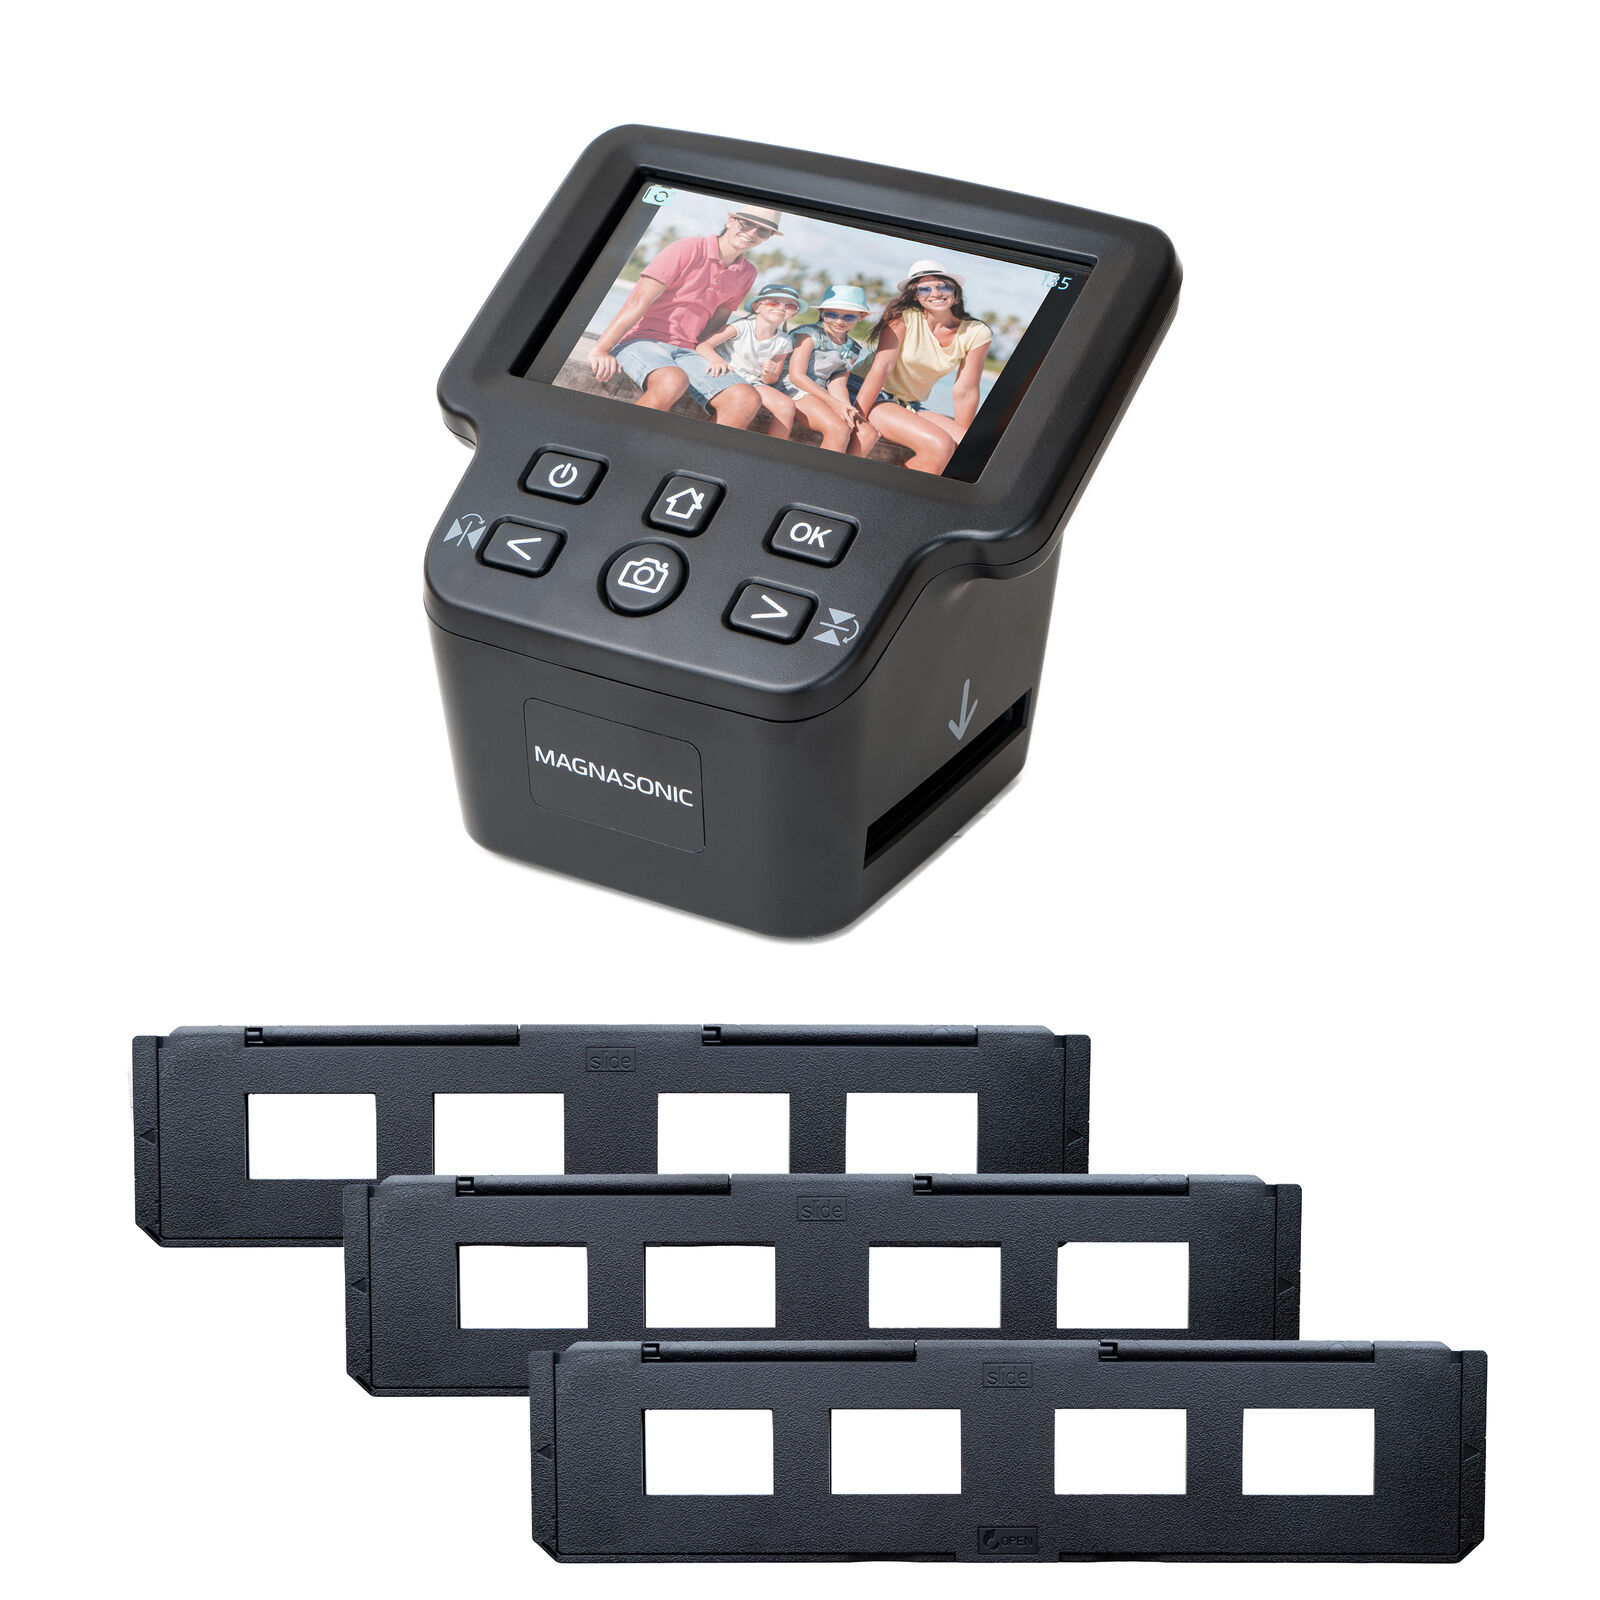 Magnasonic 24MP Film Scanner with 5'' Display and 35mm Slide Film Holders